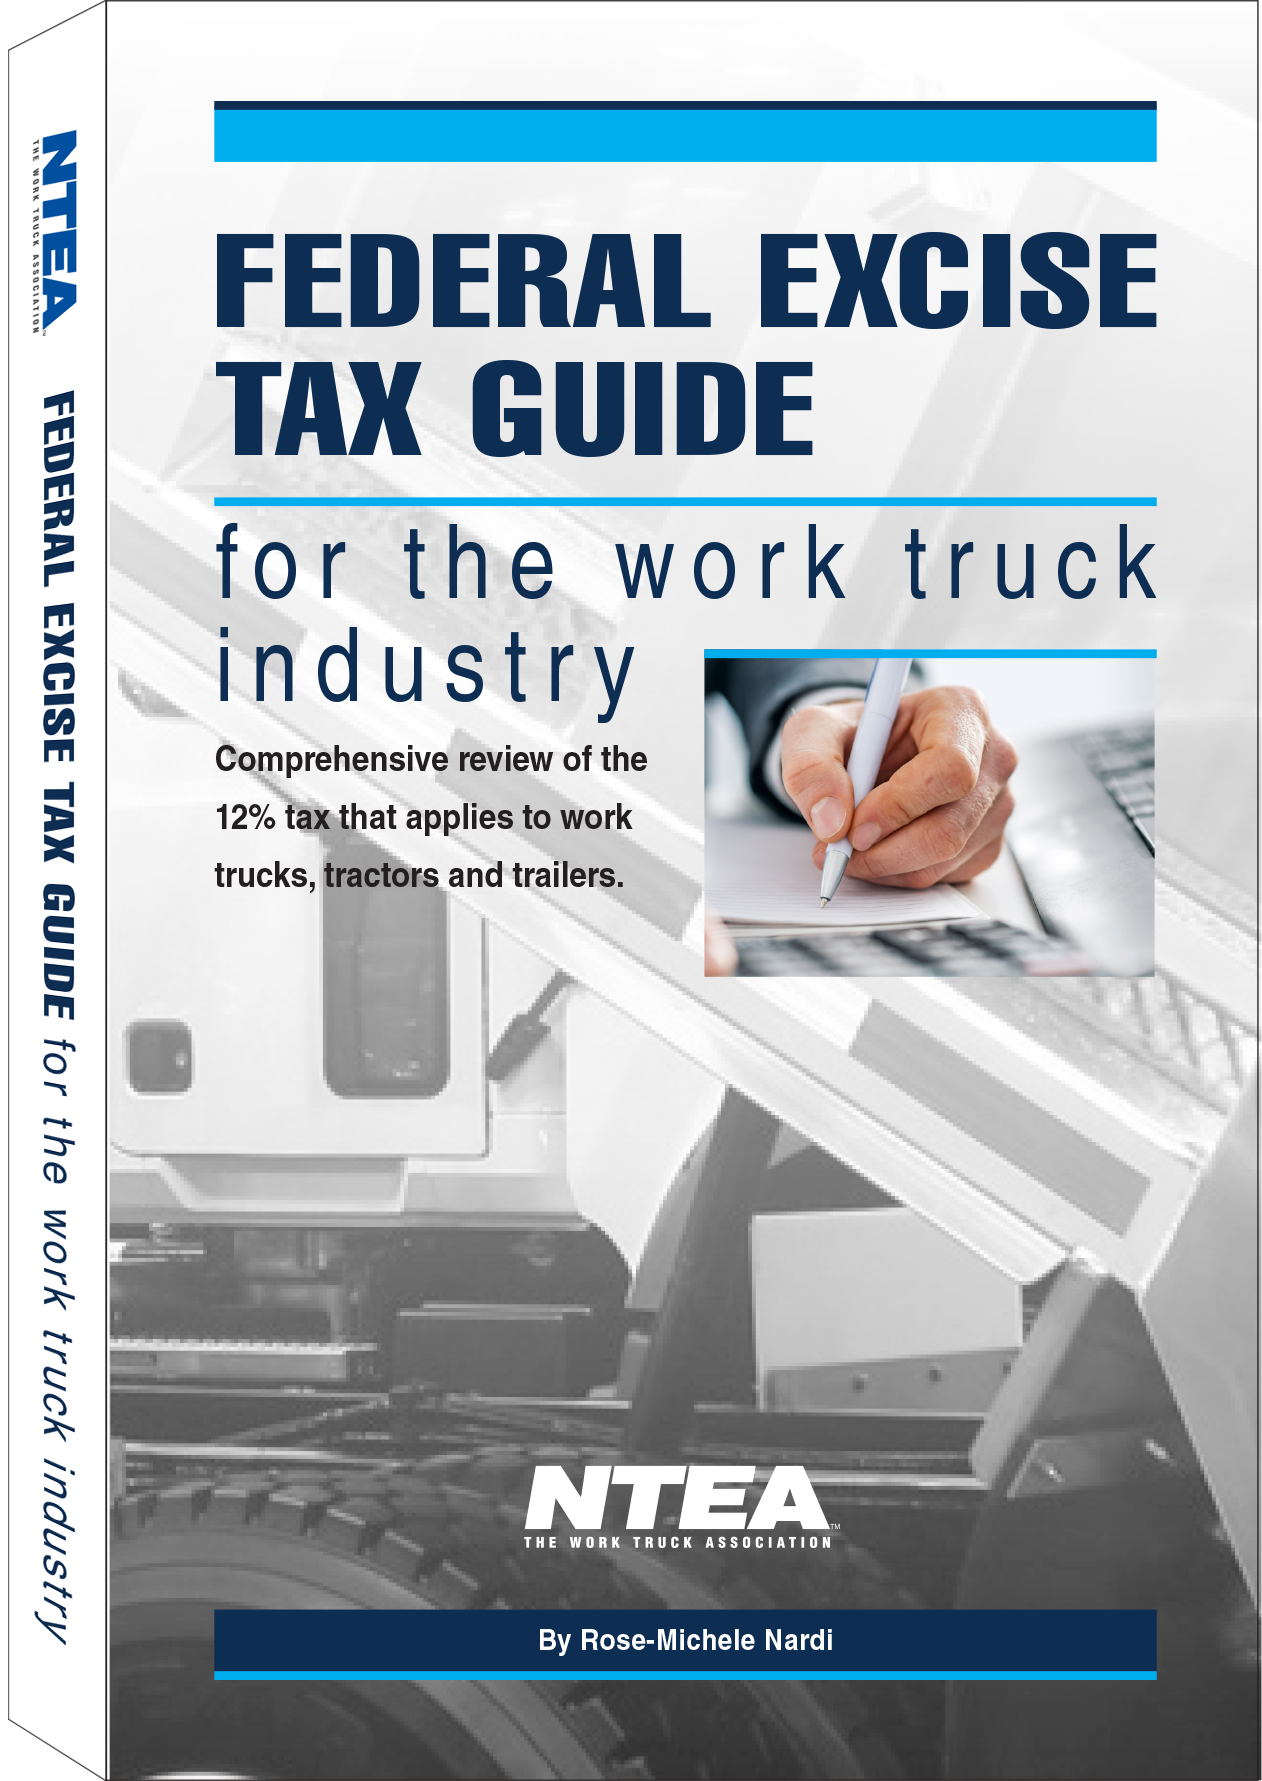 Federal Excise Tax Guide